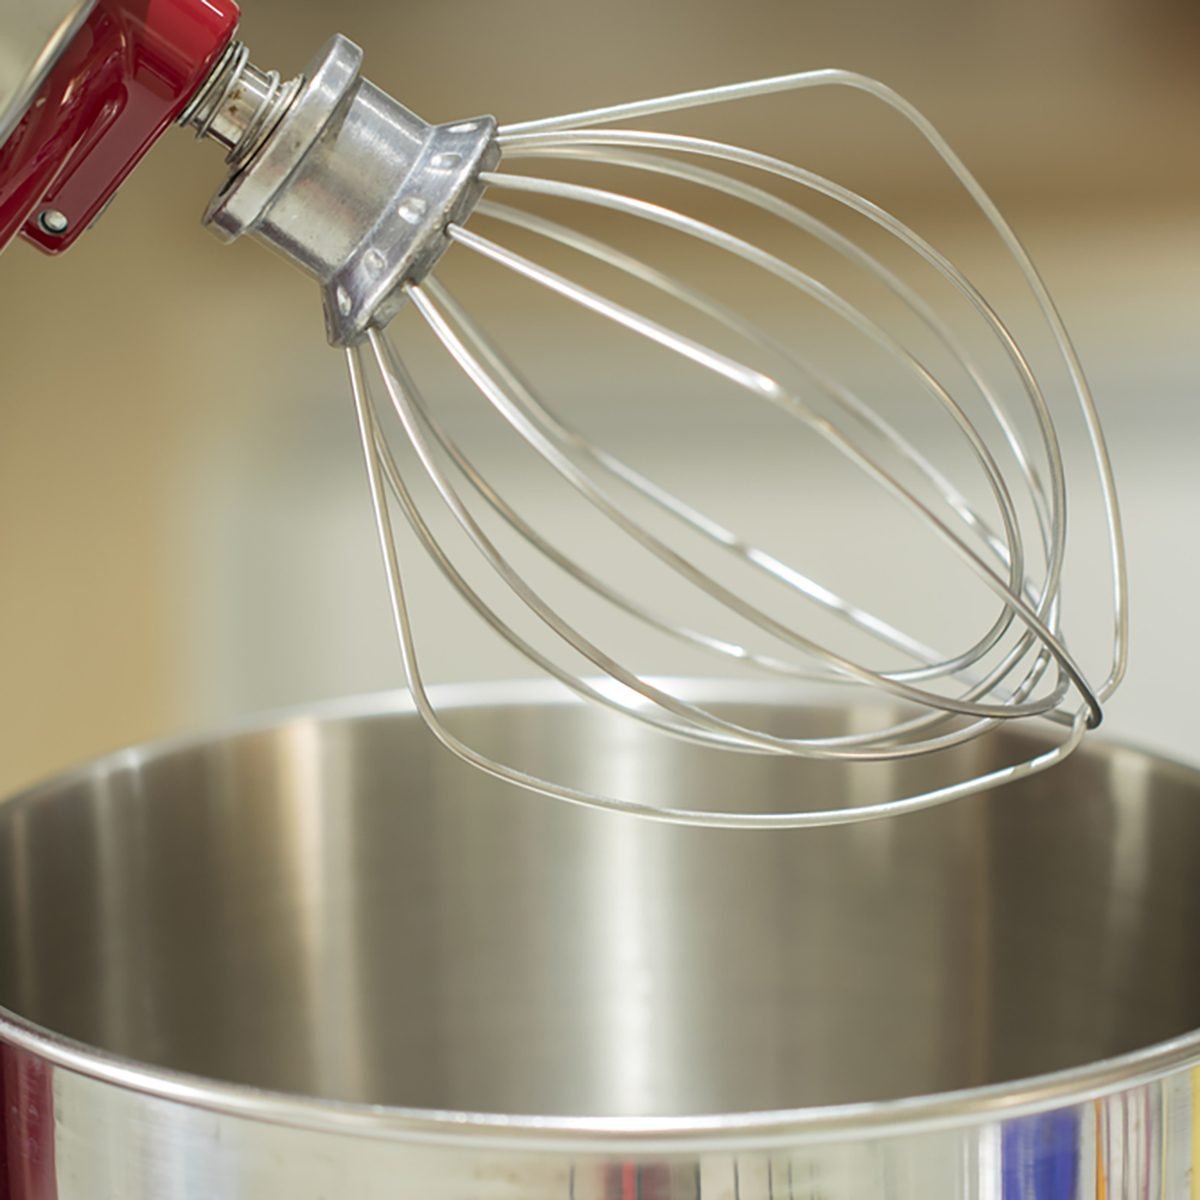 How to make the most of your stand mixer - The Washington Post